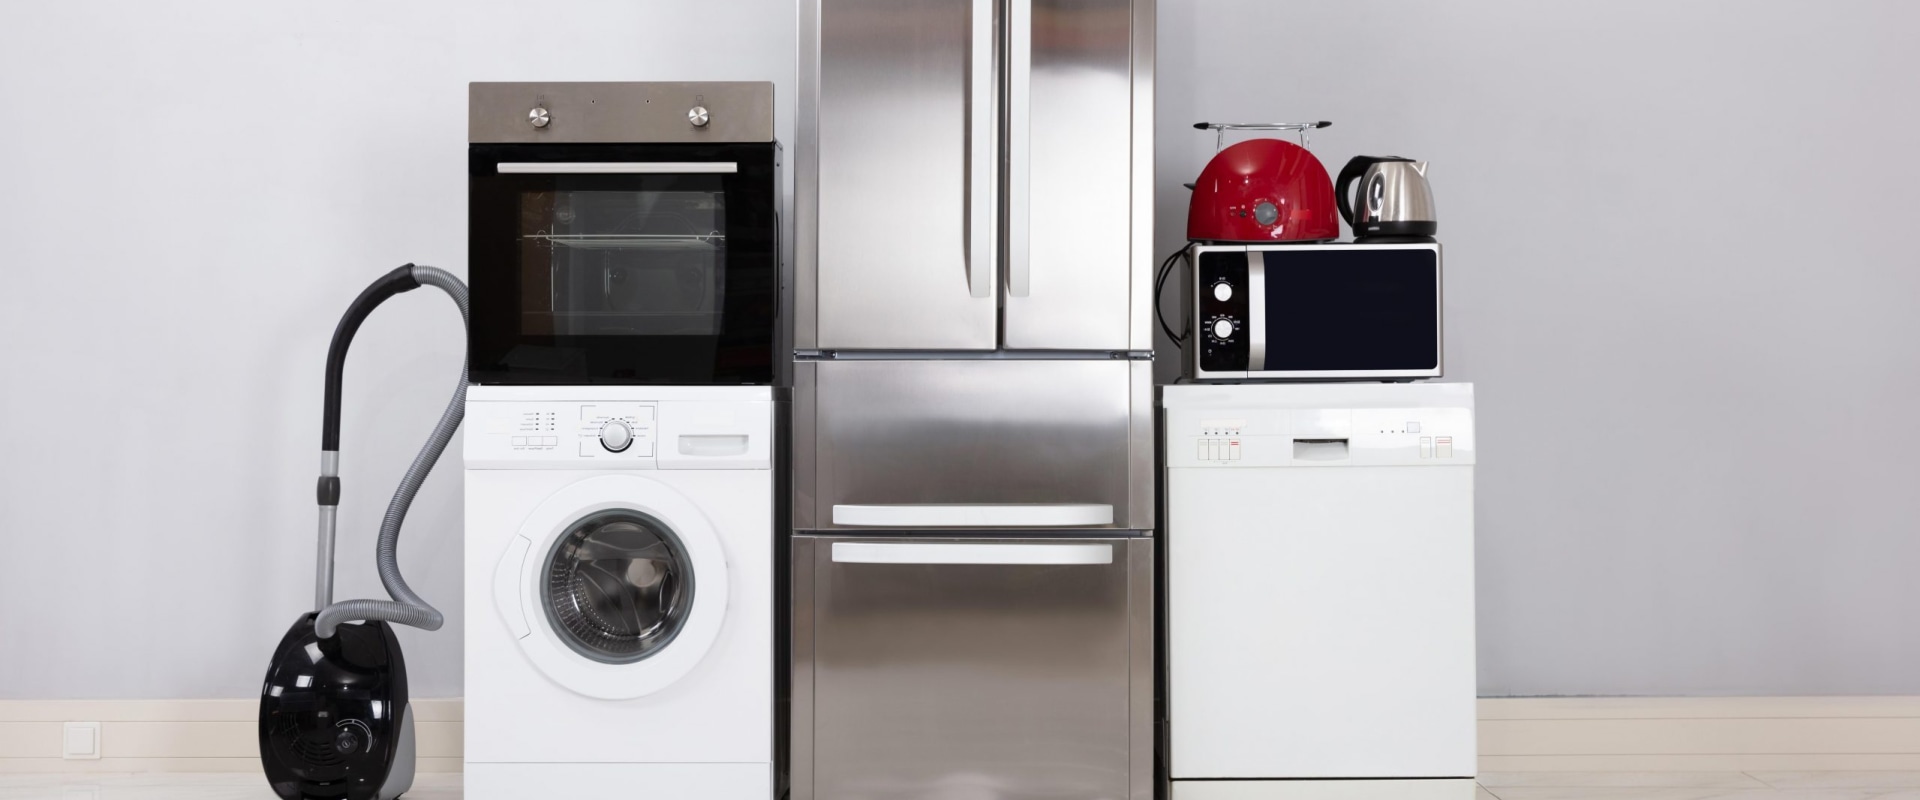 What is the most used home appliance?